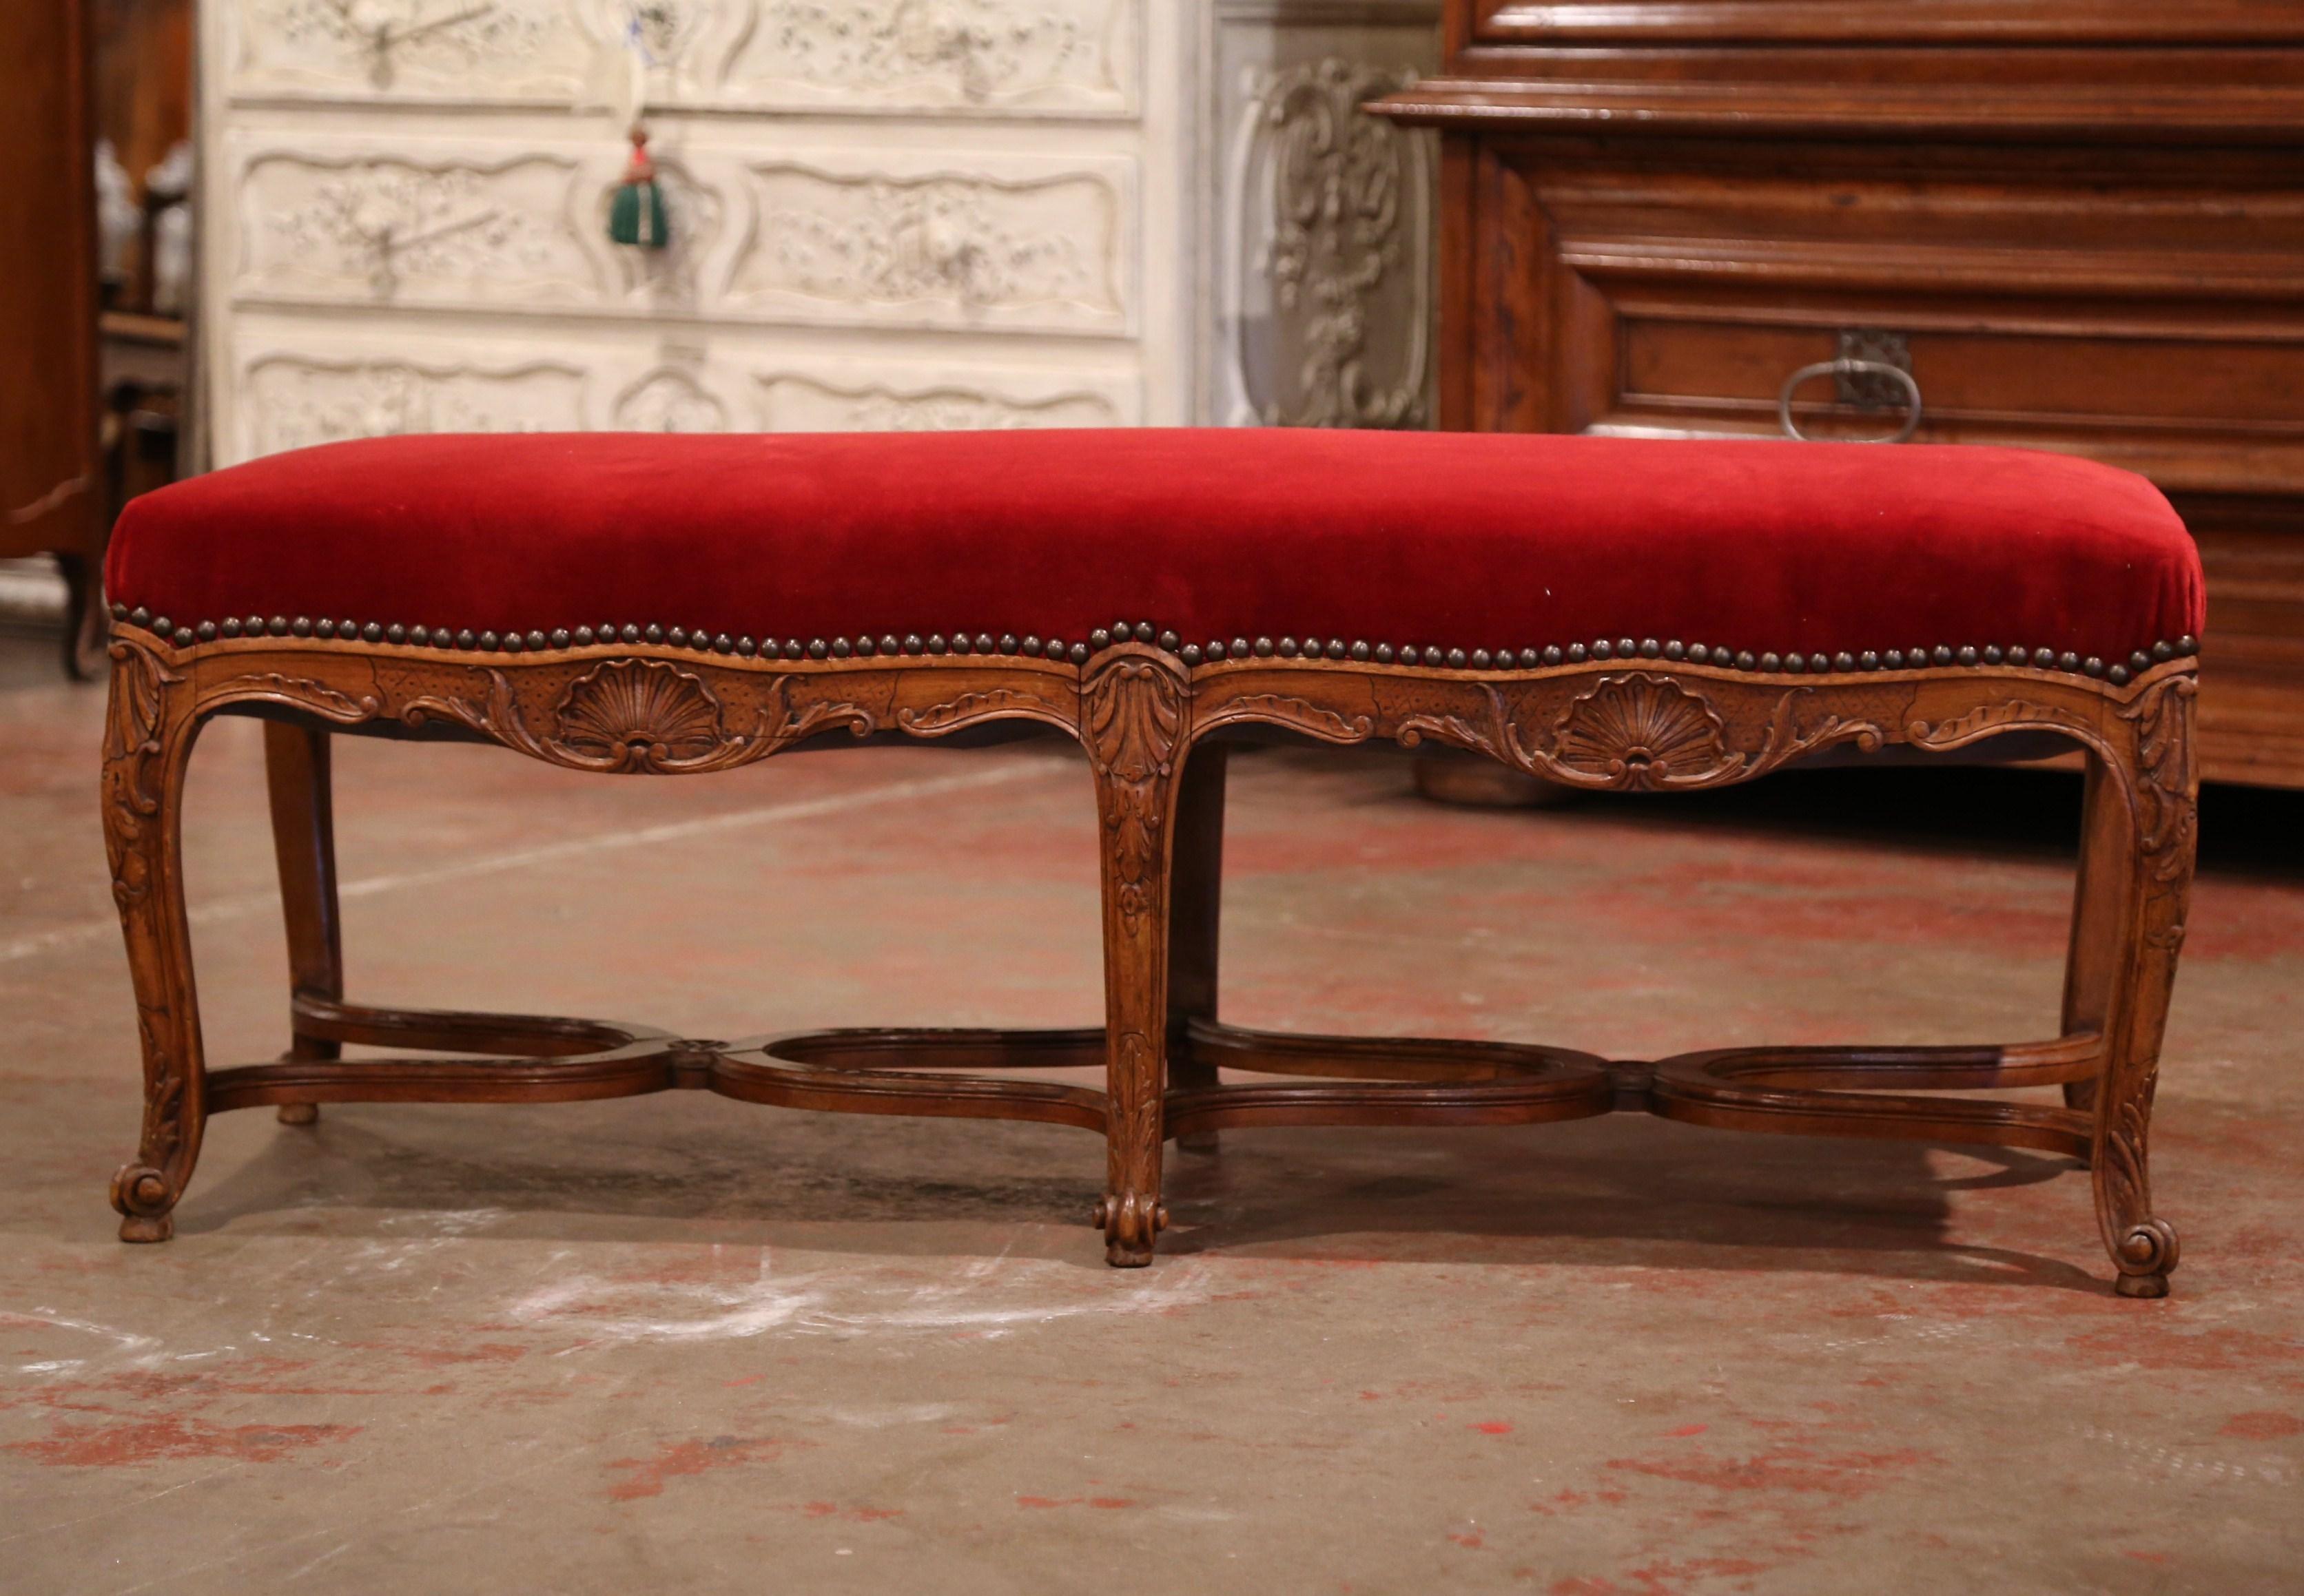 Crafted in Provence, France circa 1920, the fruit wood bench stands on six cabriole legs decorated with acanthus leaf motifs at the shoulder. The bench features a curved stretcher at the bottom decorated with carved leaves and flowers and